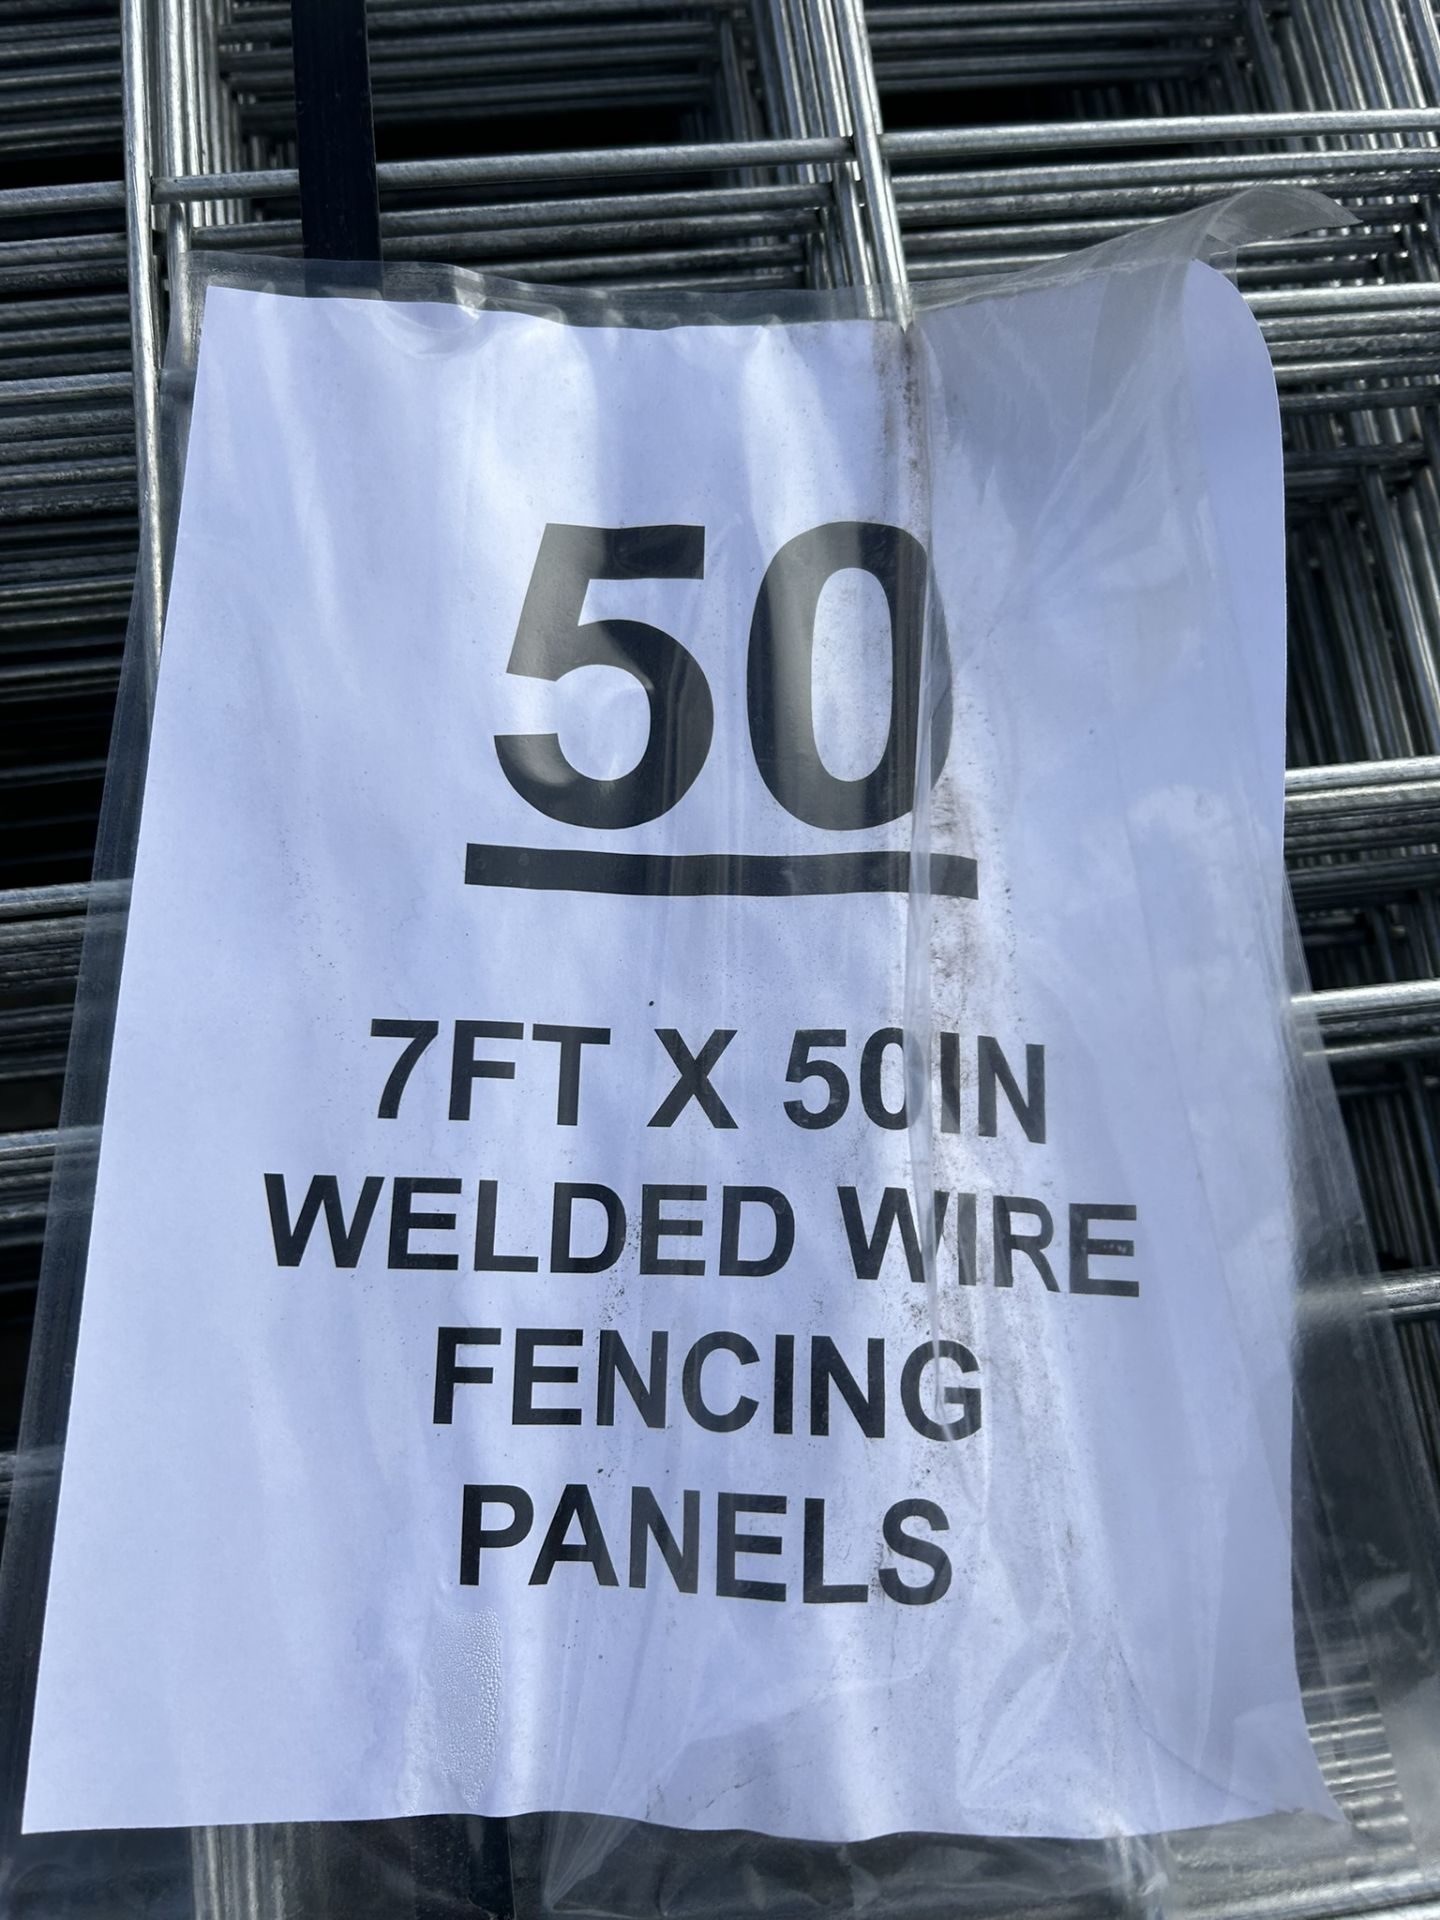 L/O - 50 - 7'x50" WELD WIRE FENCING PANELS - Image 3 of 3